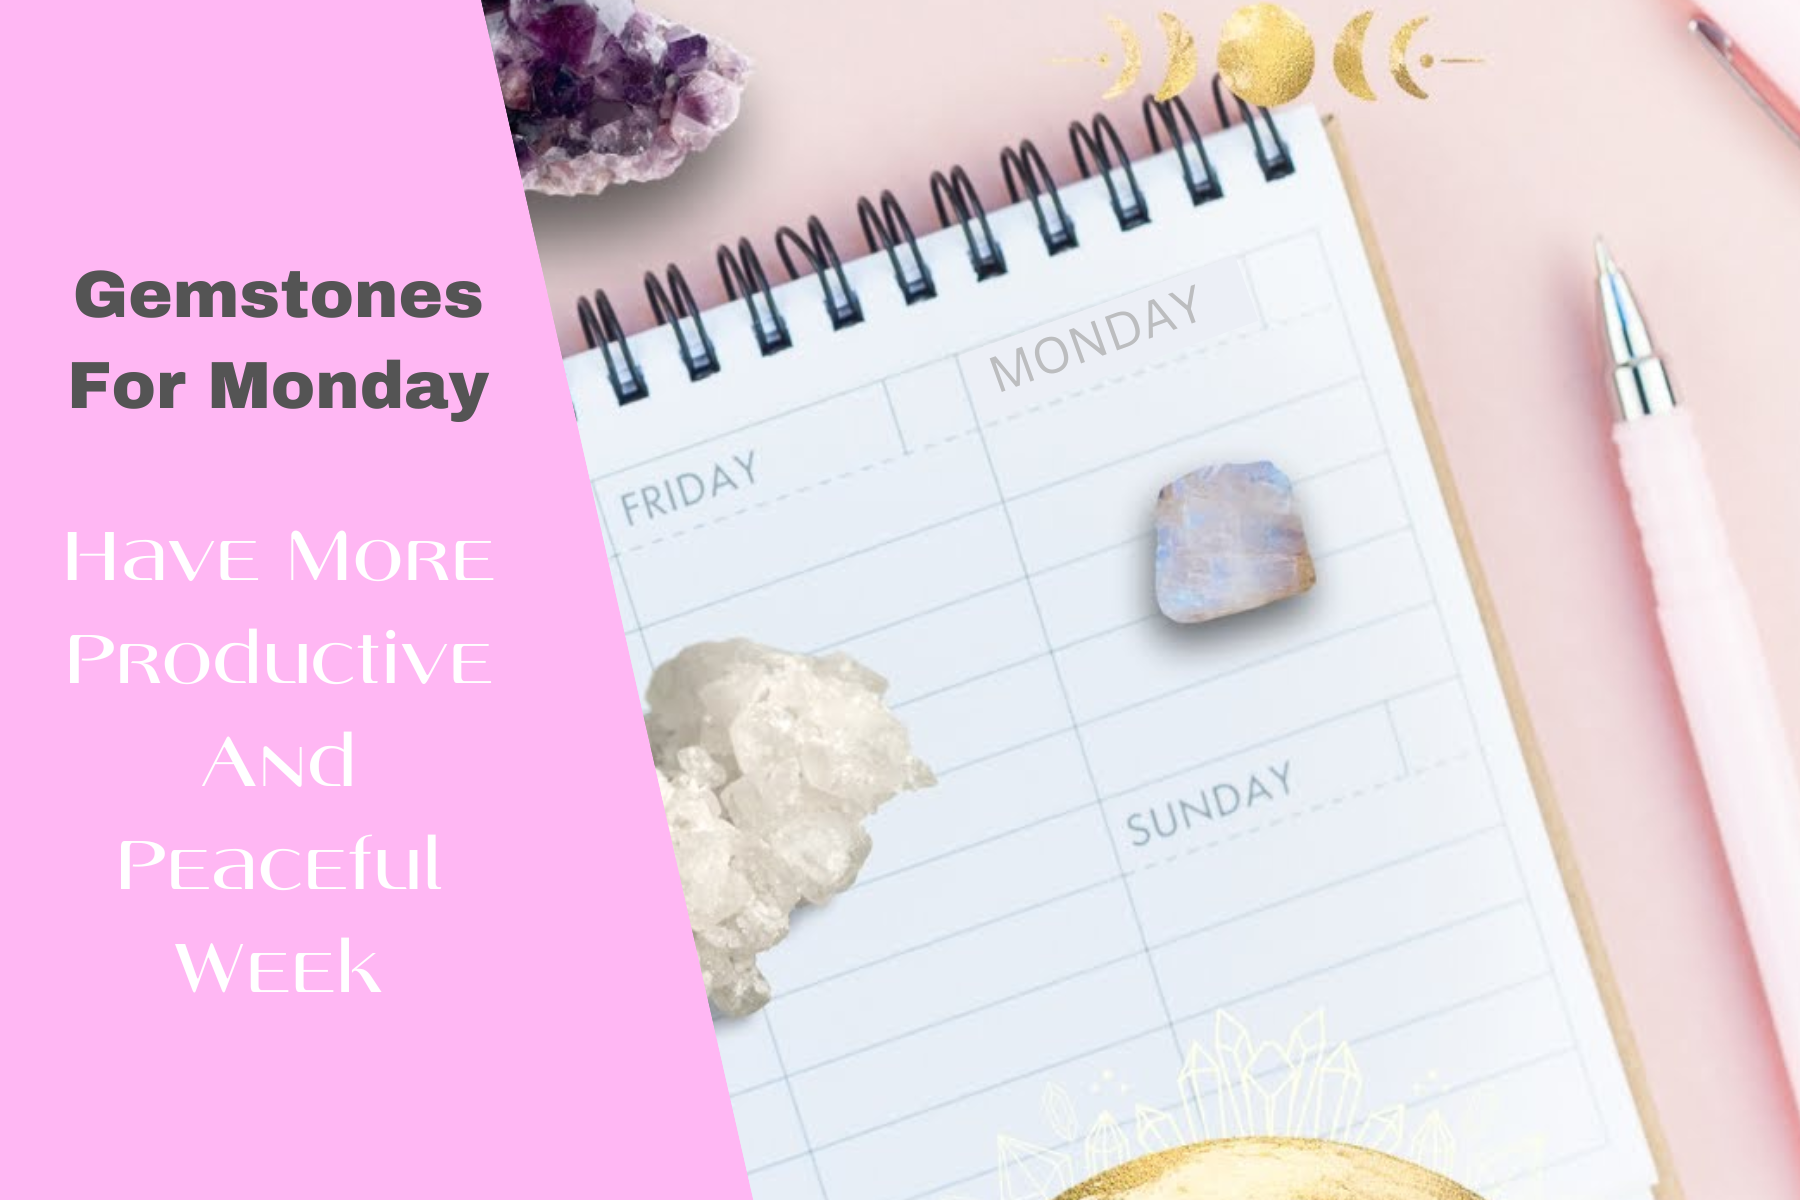 Gemstones For Monday - Have More Productive And Peaceful Week